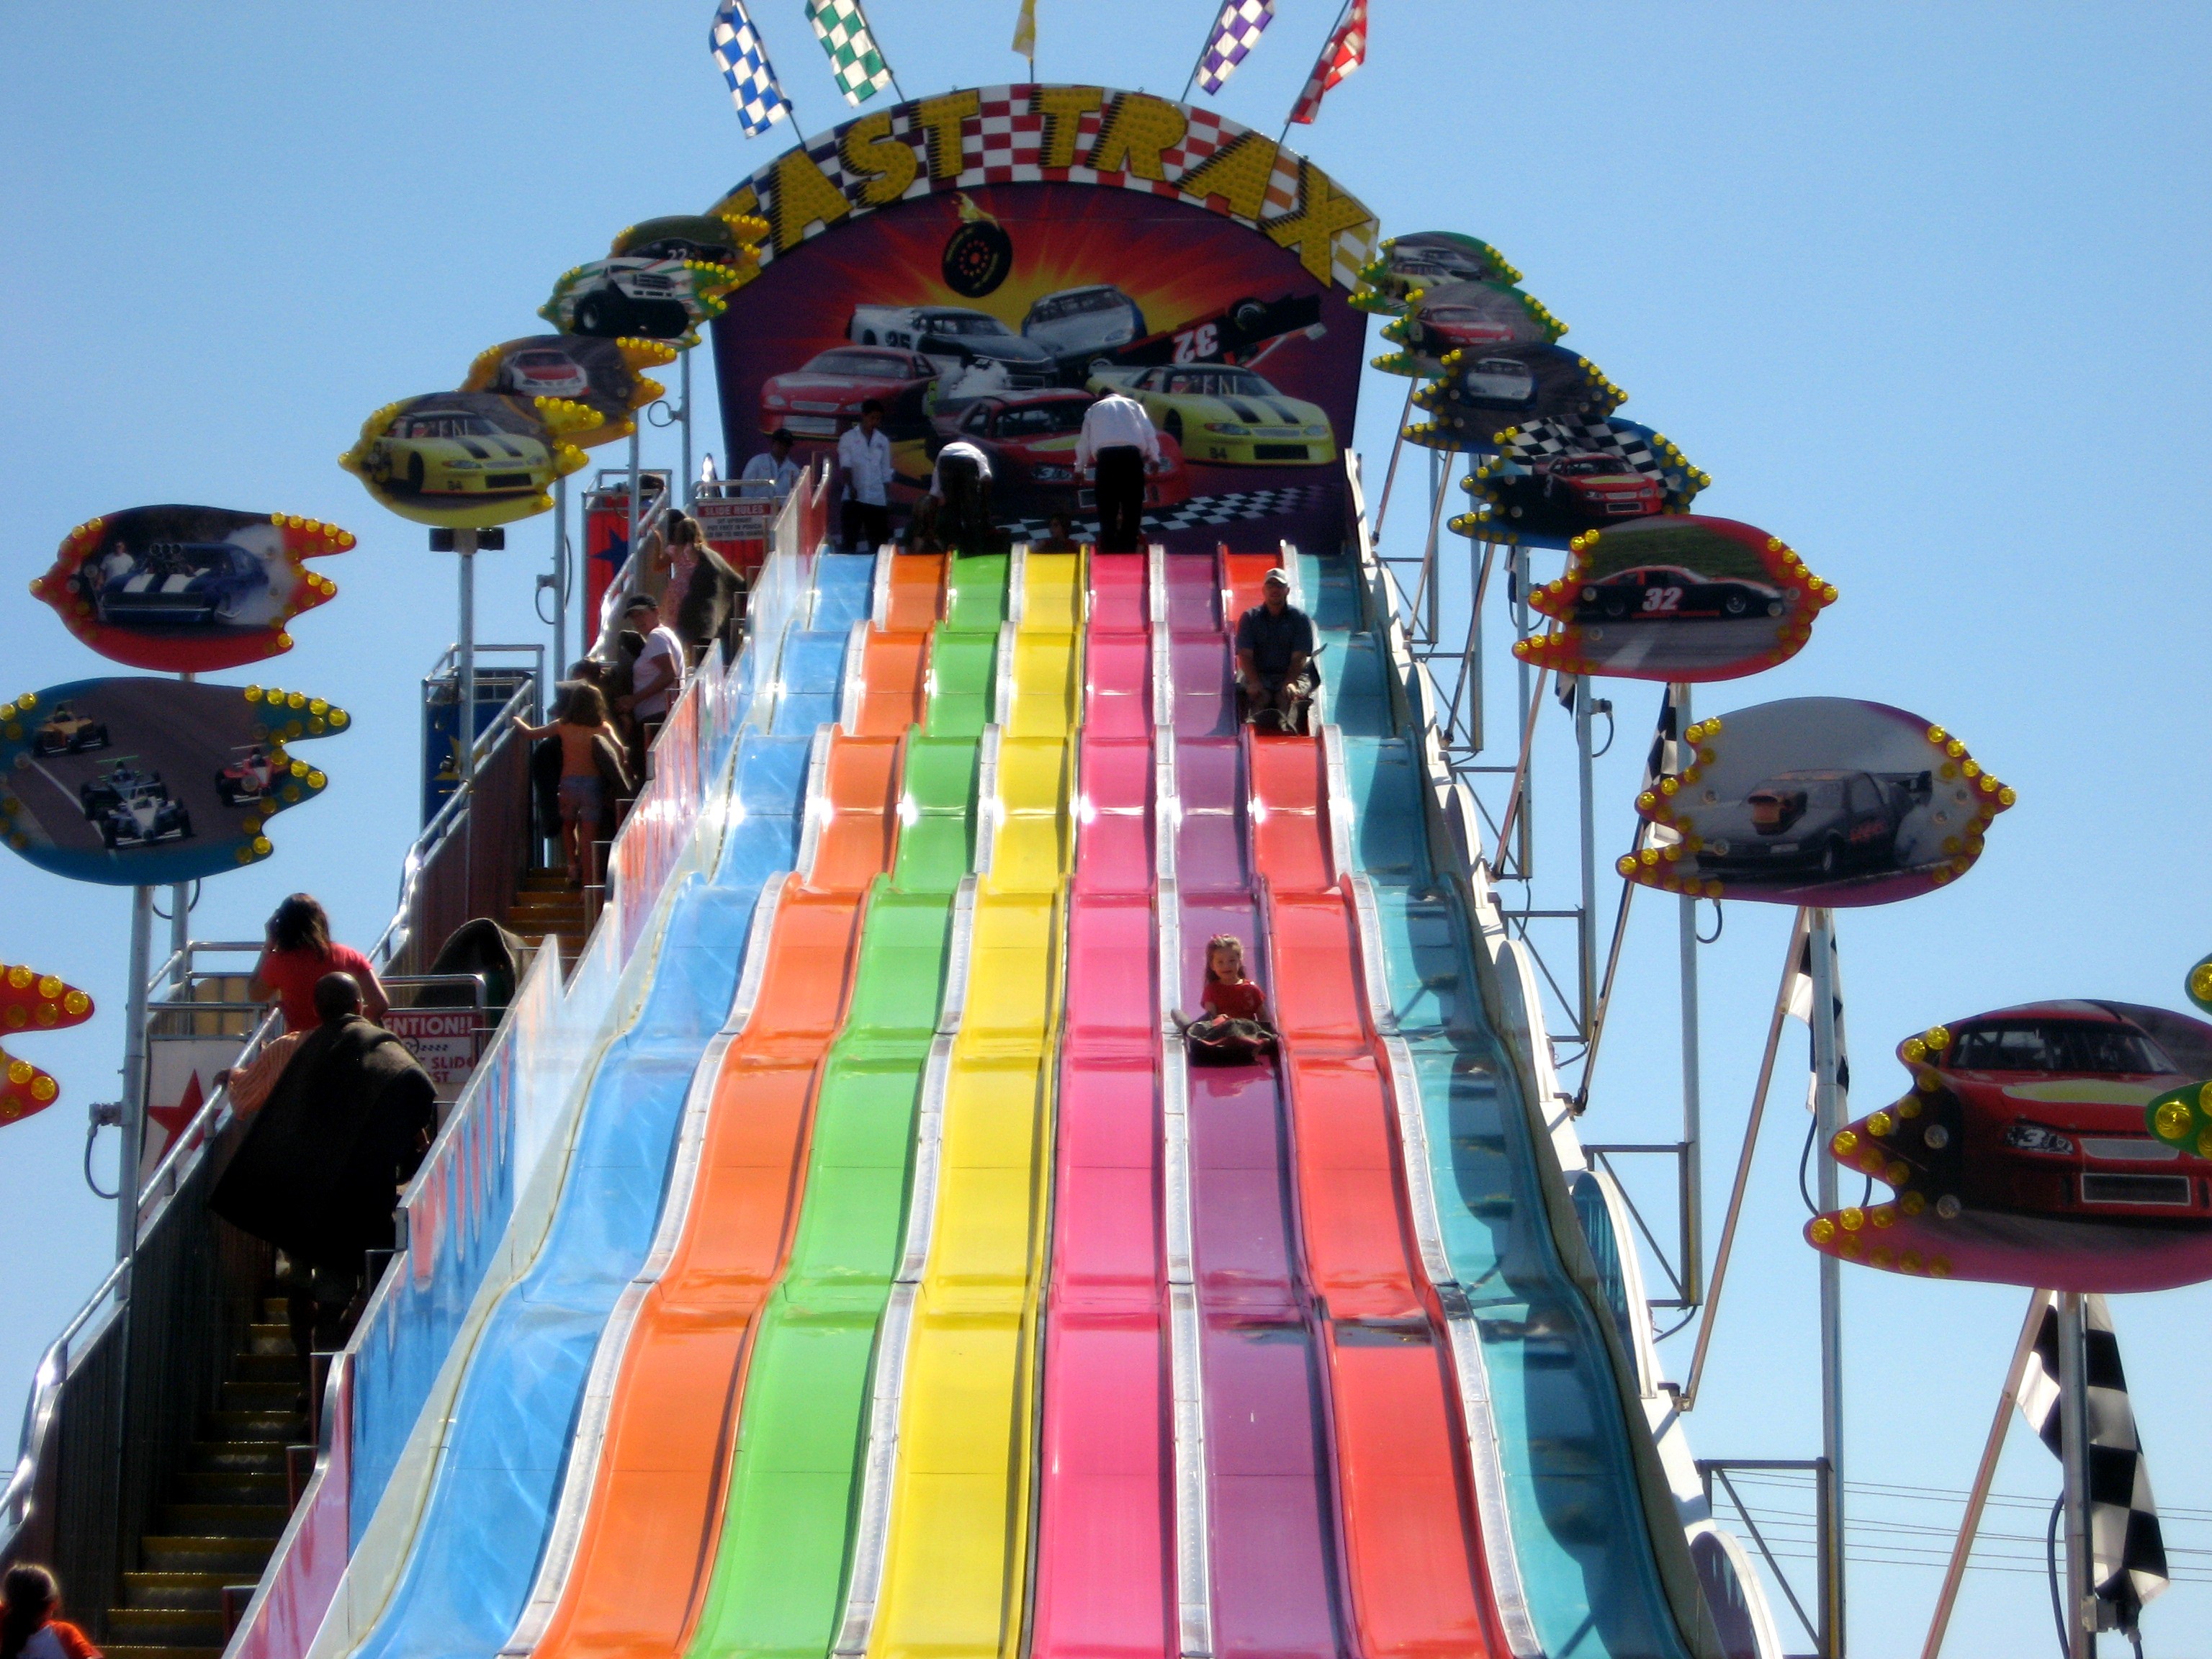 Super Slide at the Texas State Fair Pics4Learning